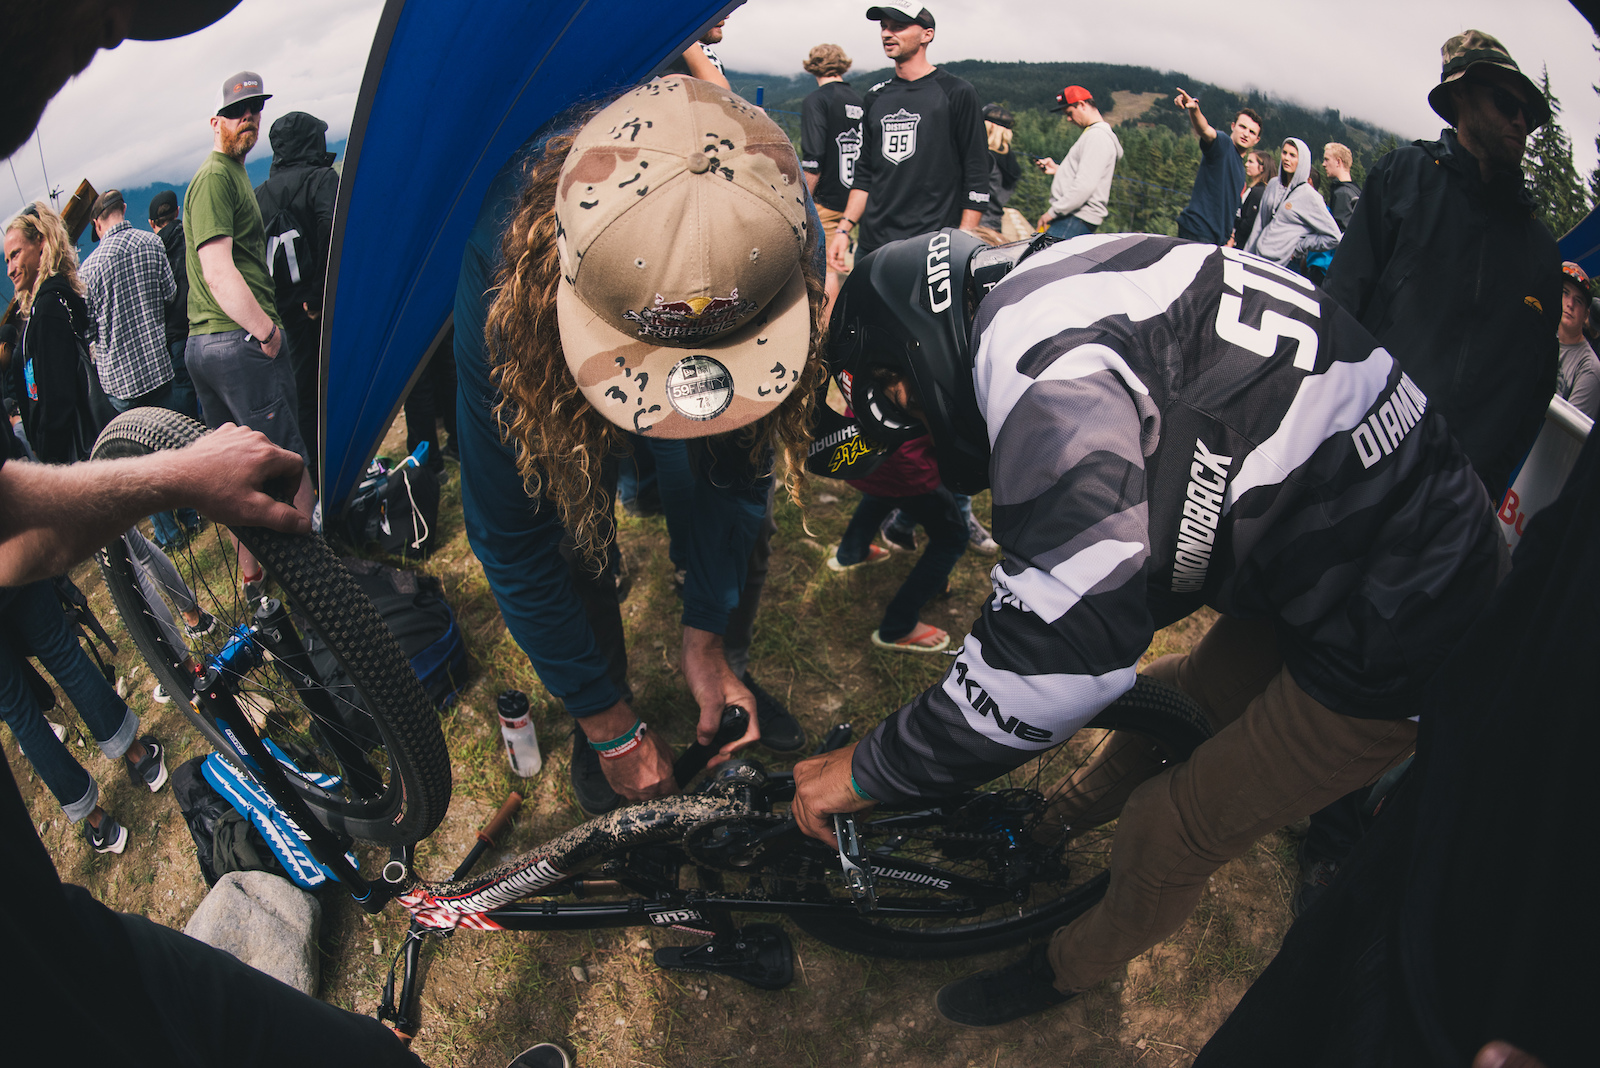 Kelly helps his fellow friend and ex-teammate Carson Storch fix a broken crank during Crankworx. Kelly knows a thing or two about fixing busted cranks. Even though they were on separate teams Kelly was a friend to everyone and happy to help.